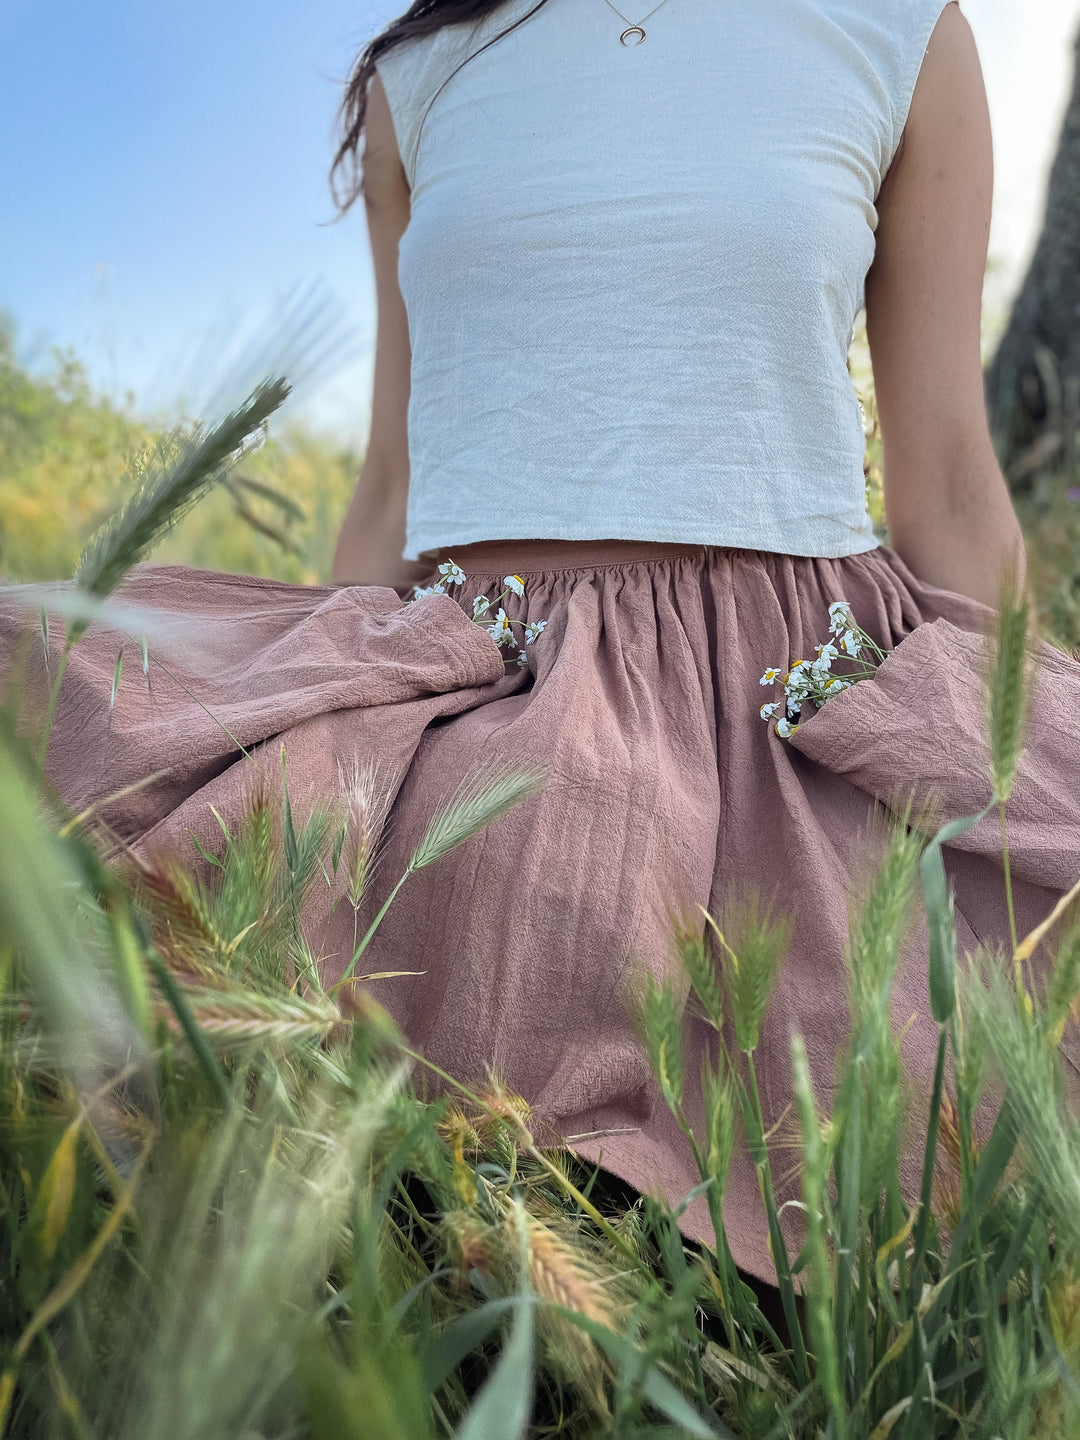 Model wearing natural white tank top and pink gauze short skirt is standing in tall grass. Skirt pockets have white flowers in them.